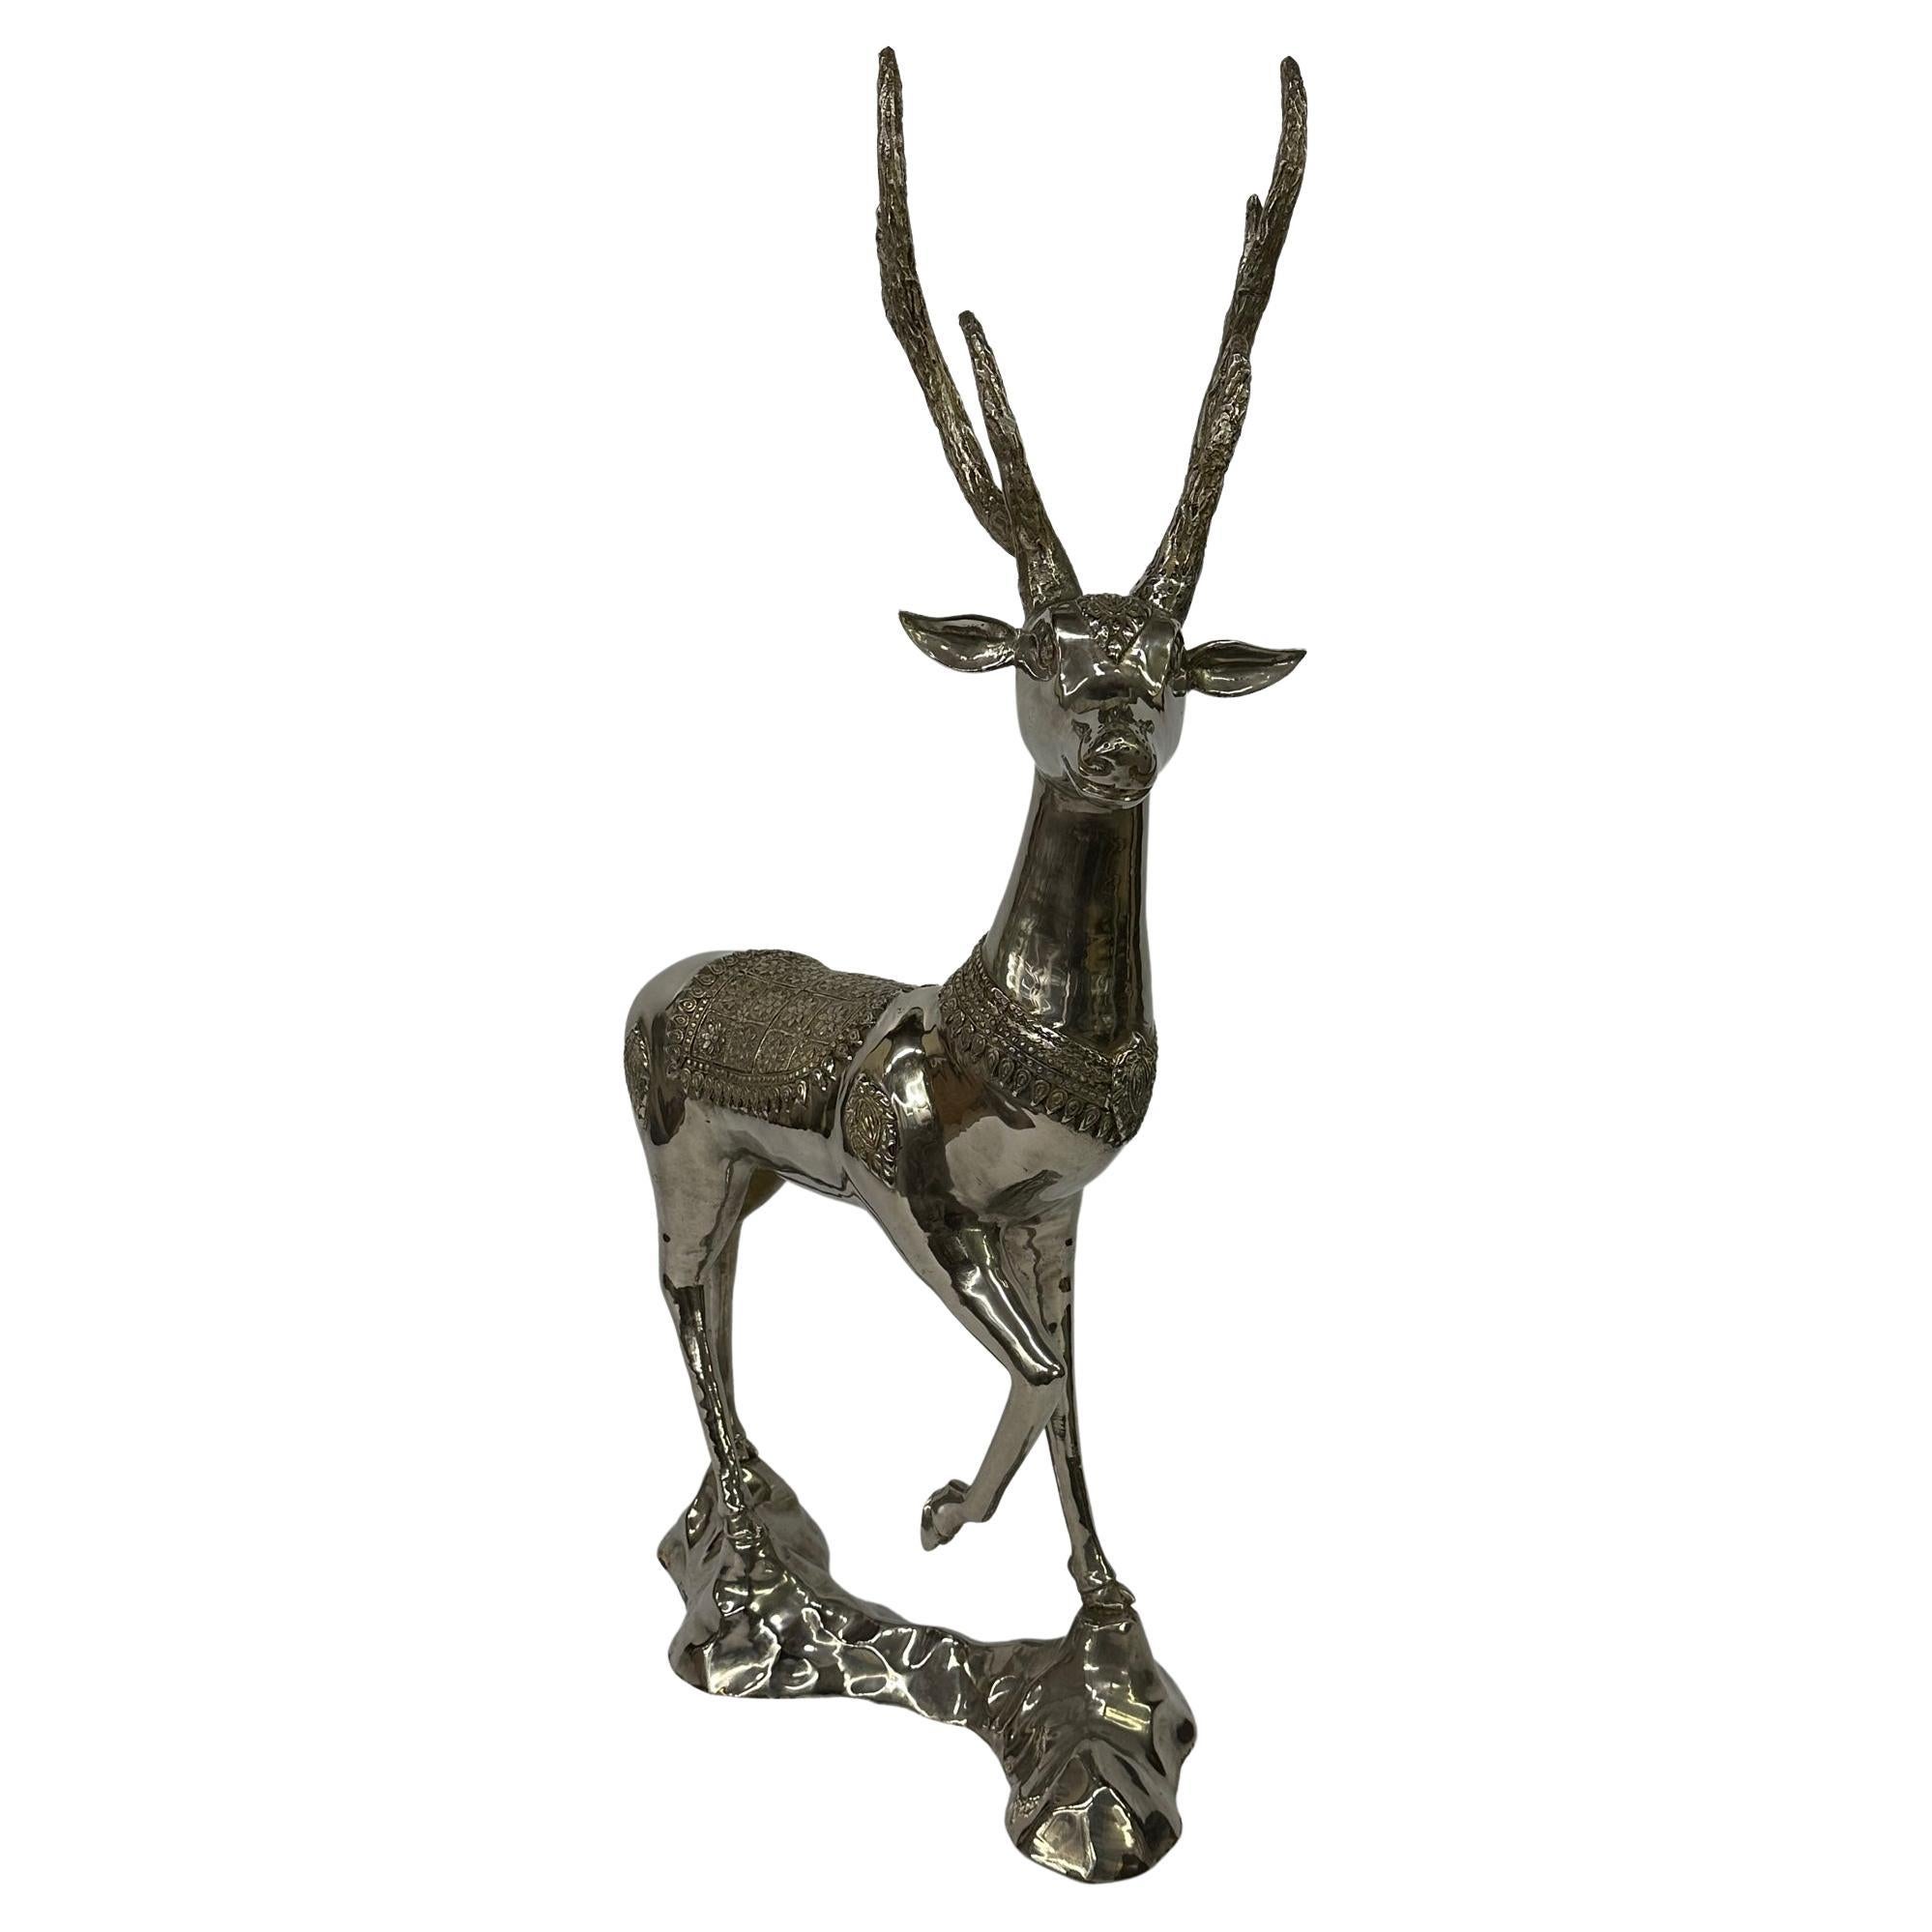 Impressive Large Nickel Plated Brass Deer Sculpture with Meticulous Detail